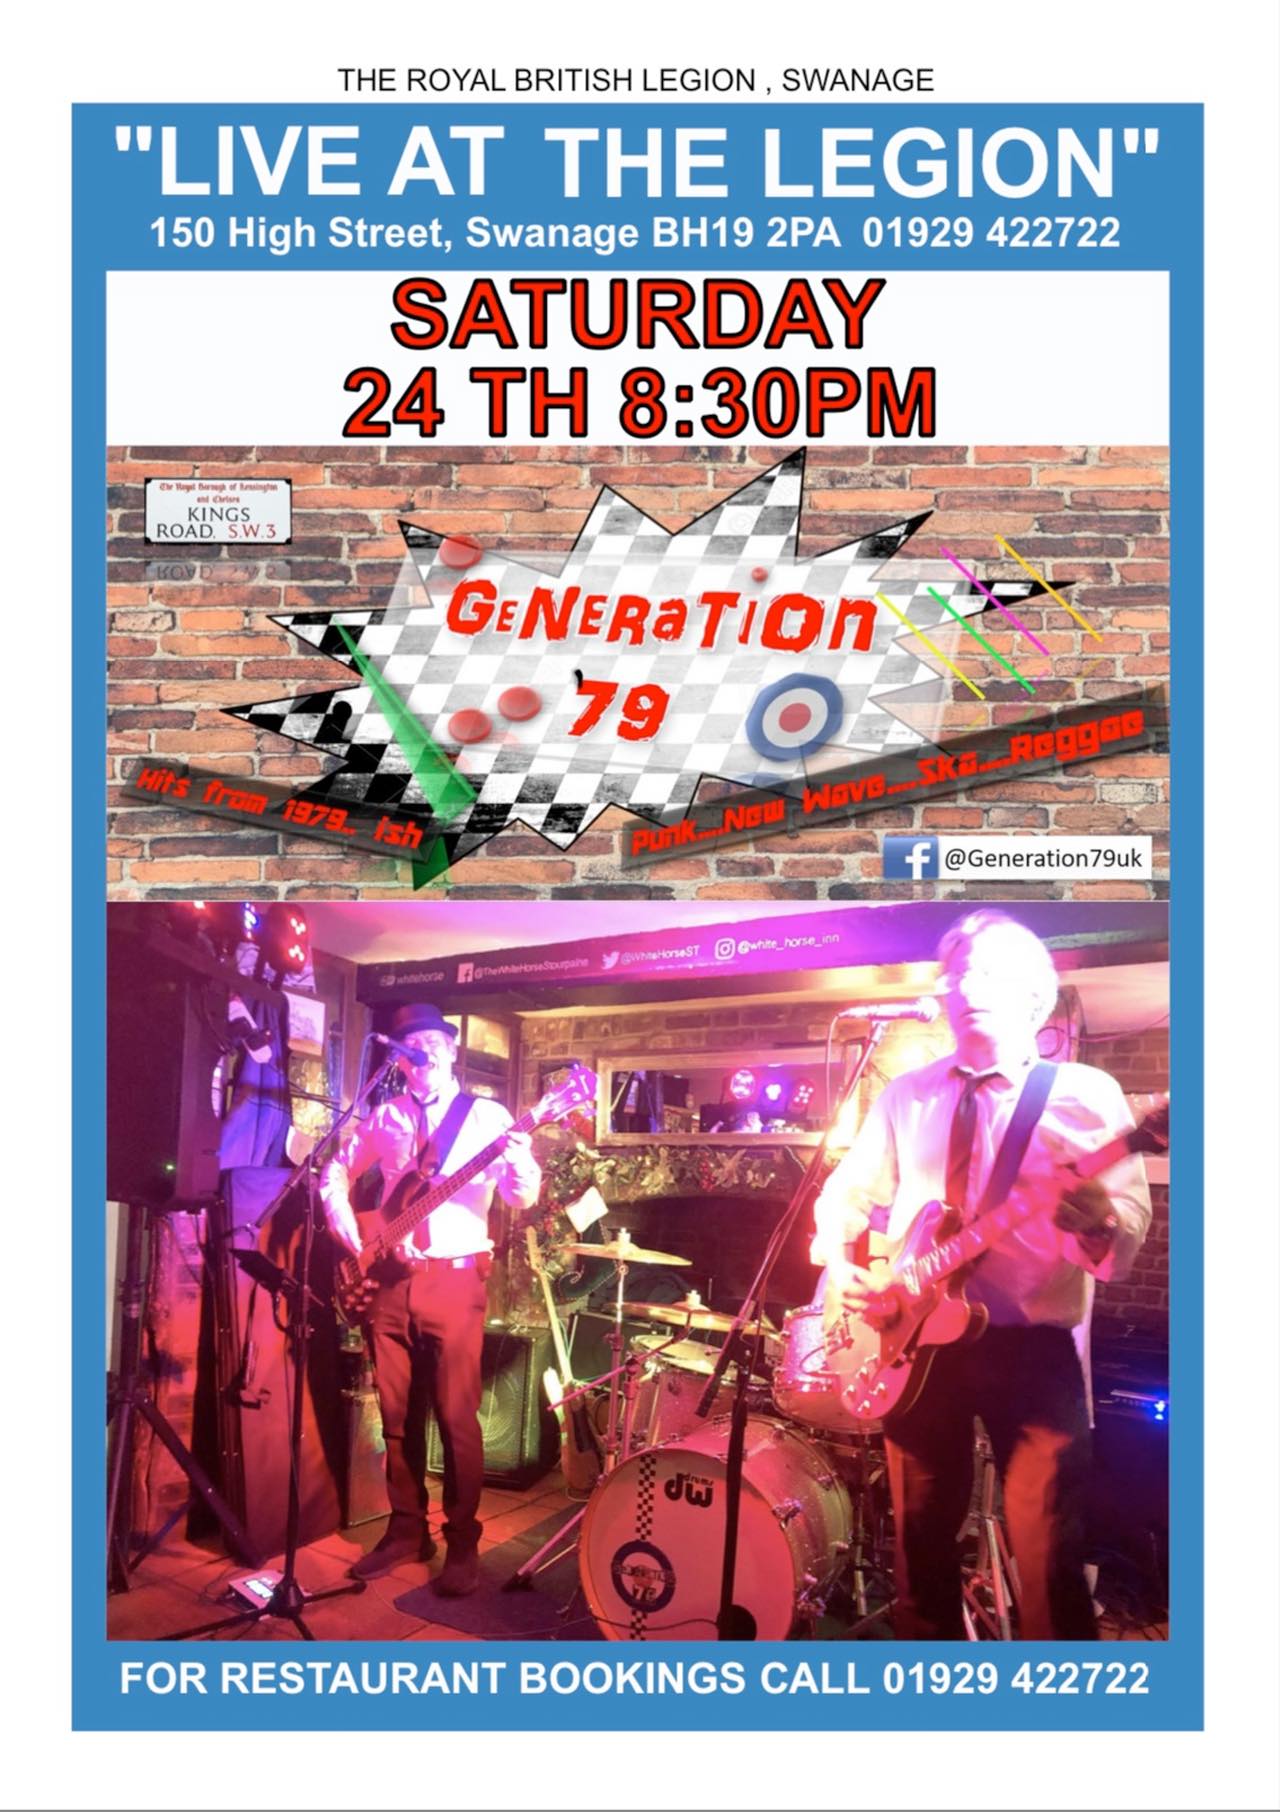 Live Music with Generation 79